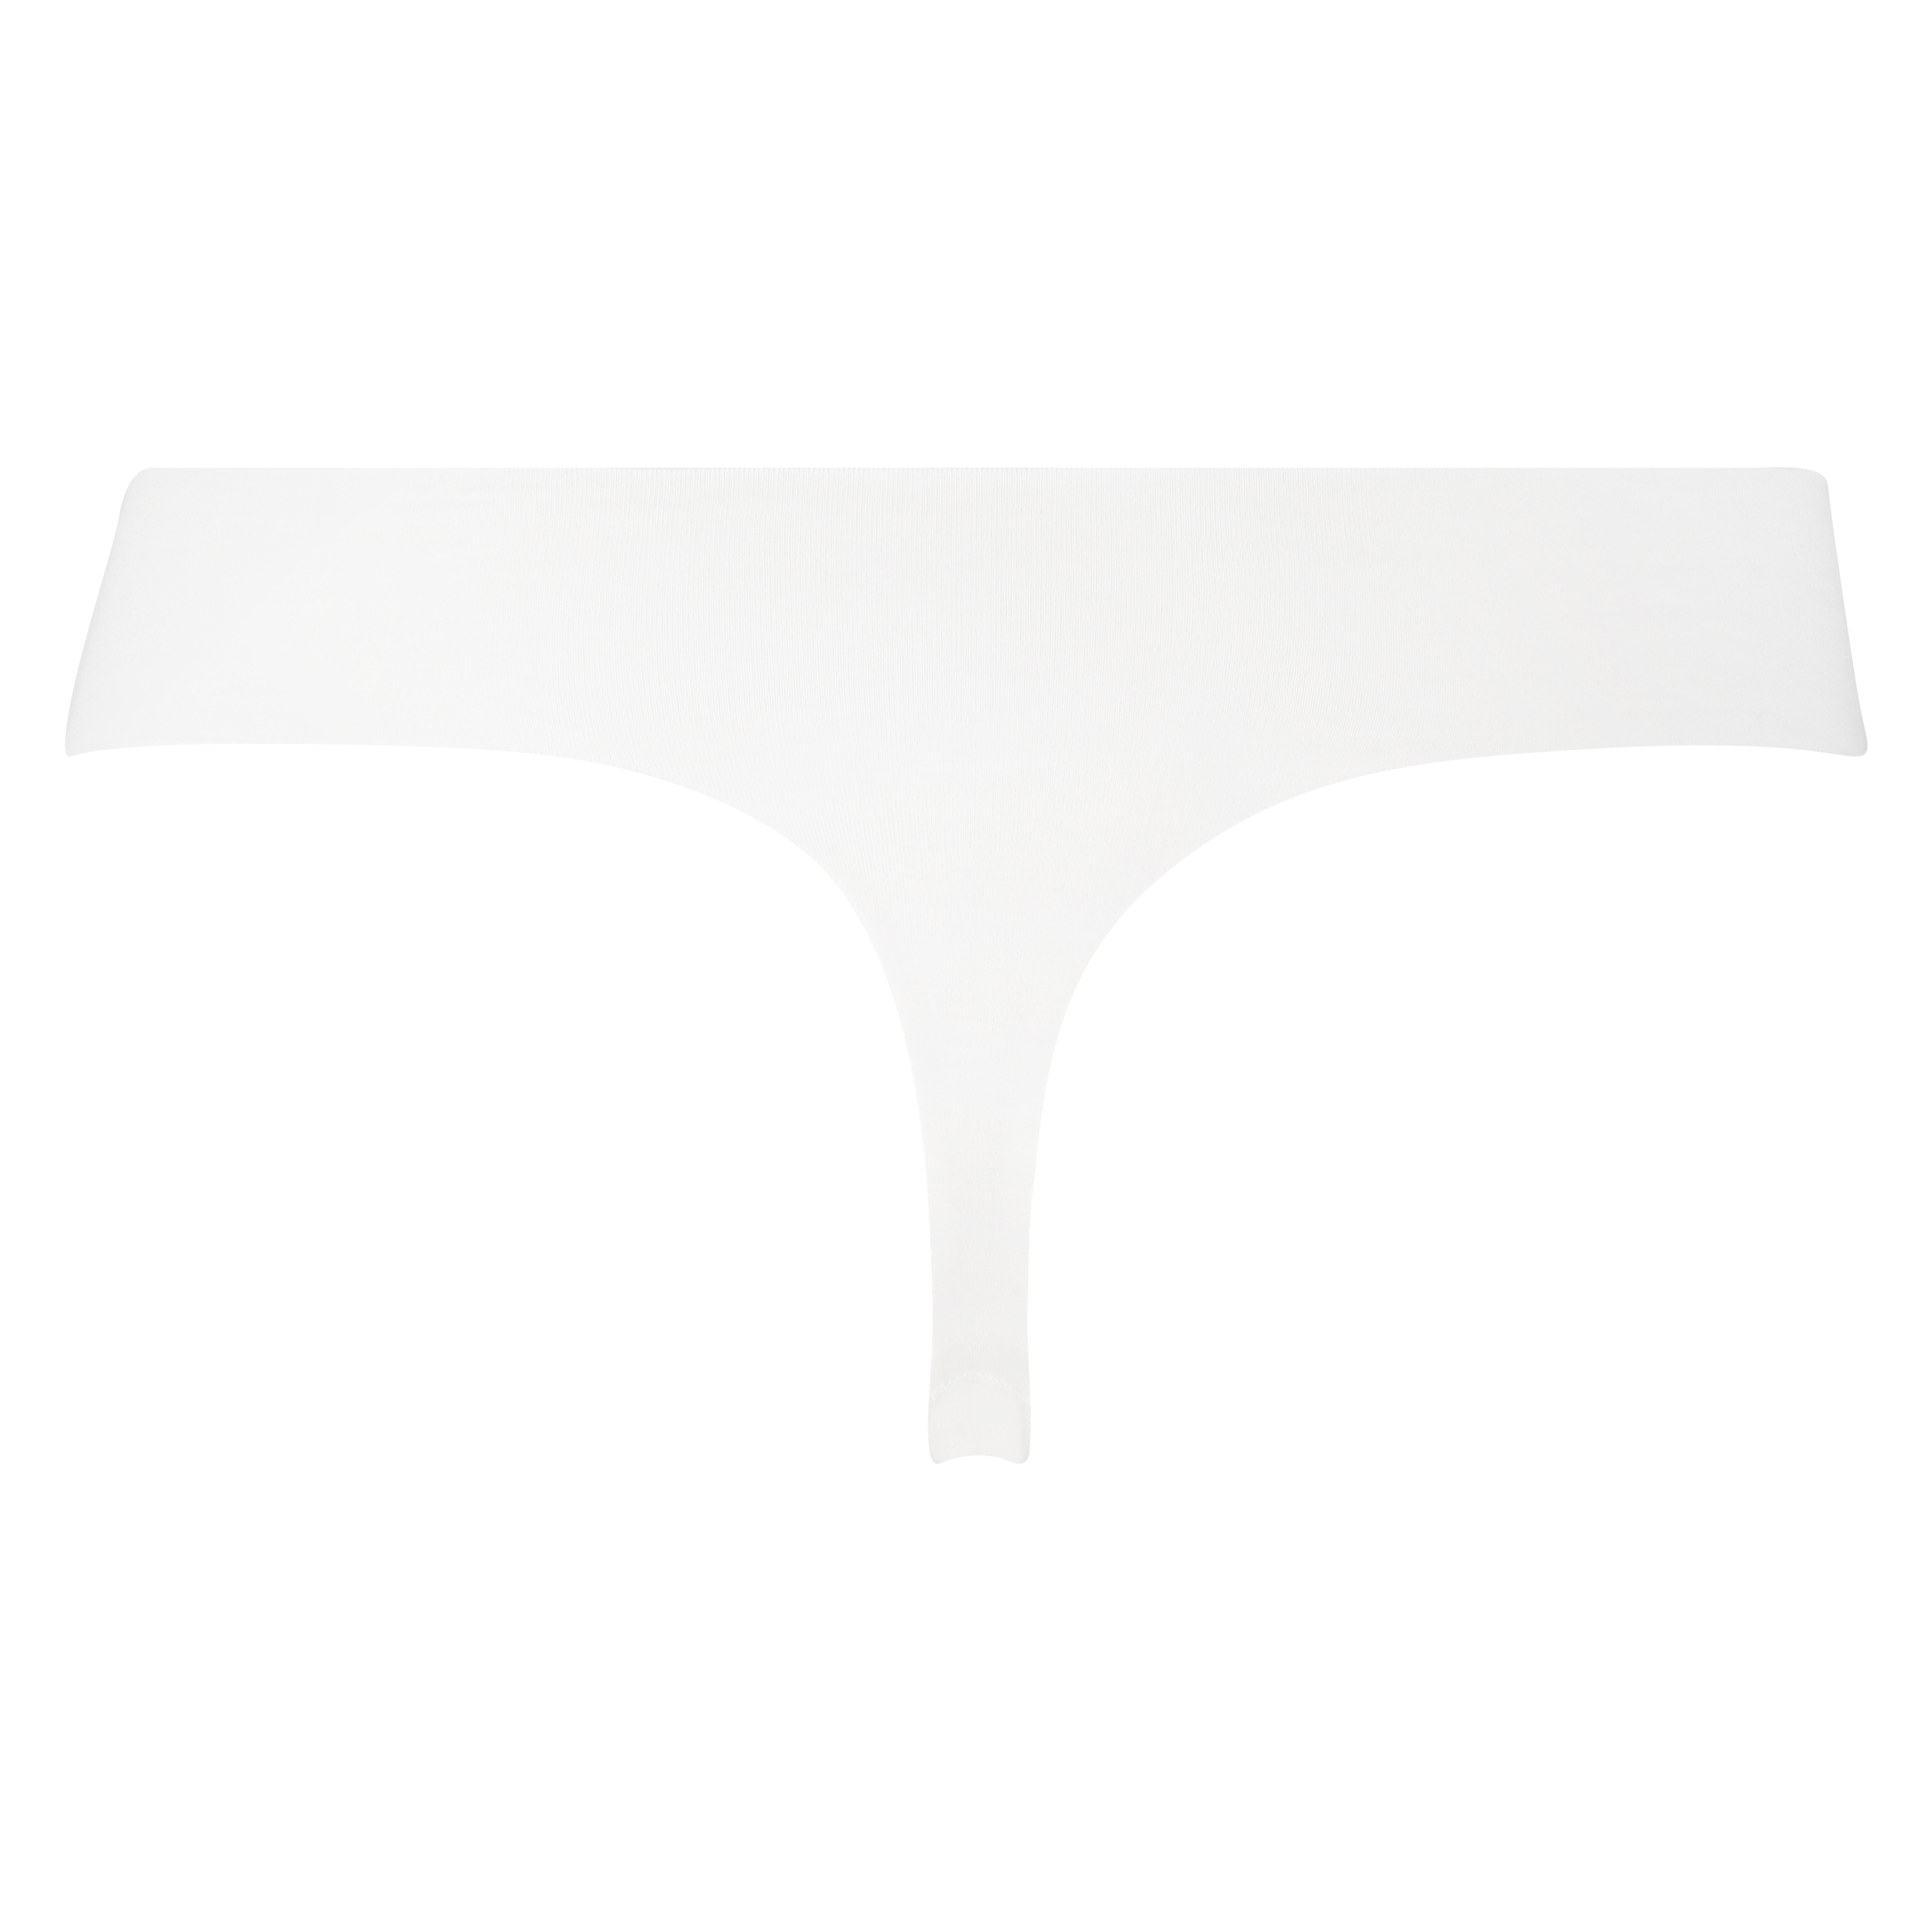 Invisible cotton thong for £4 - Thongs  G-Strings - Hunkemöller